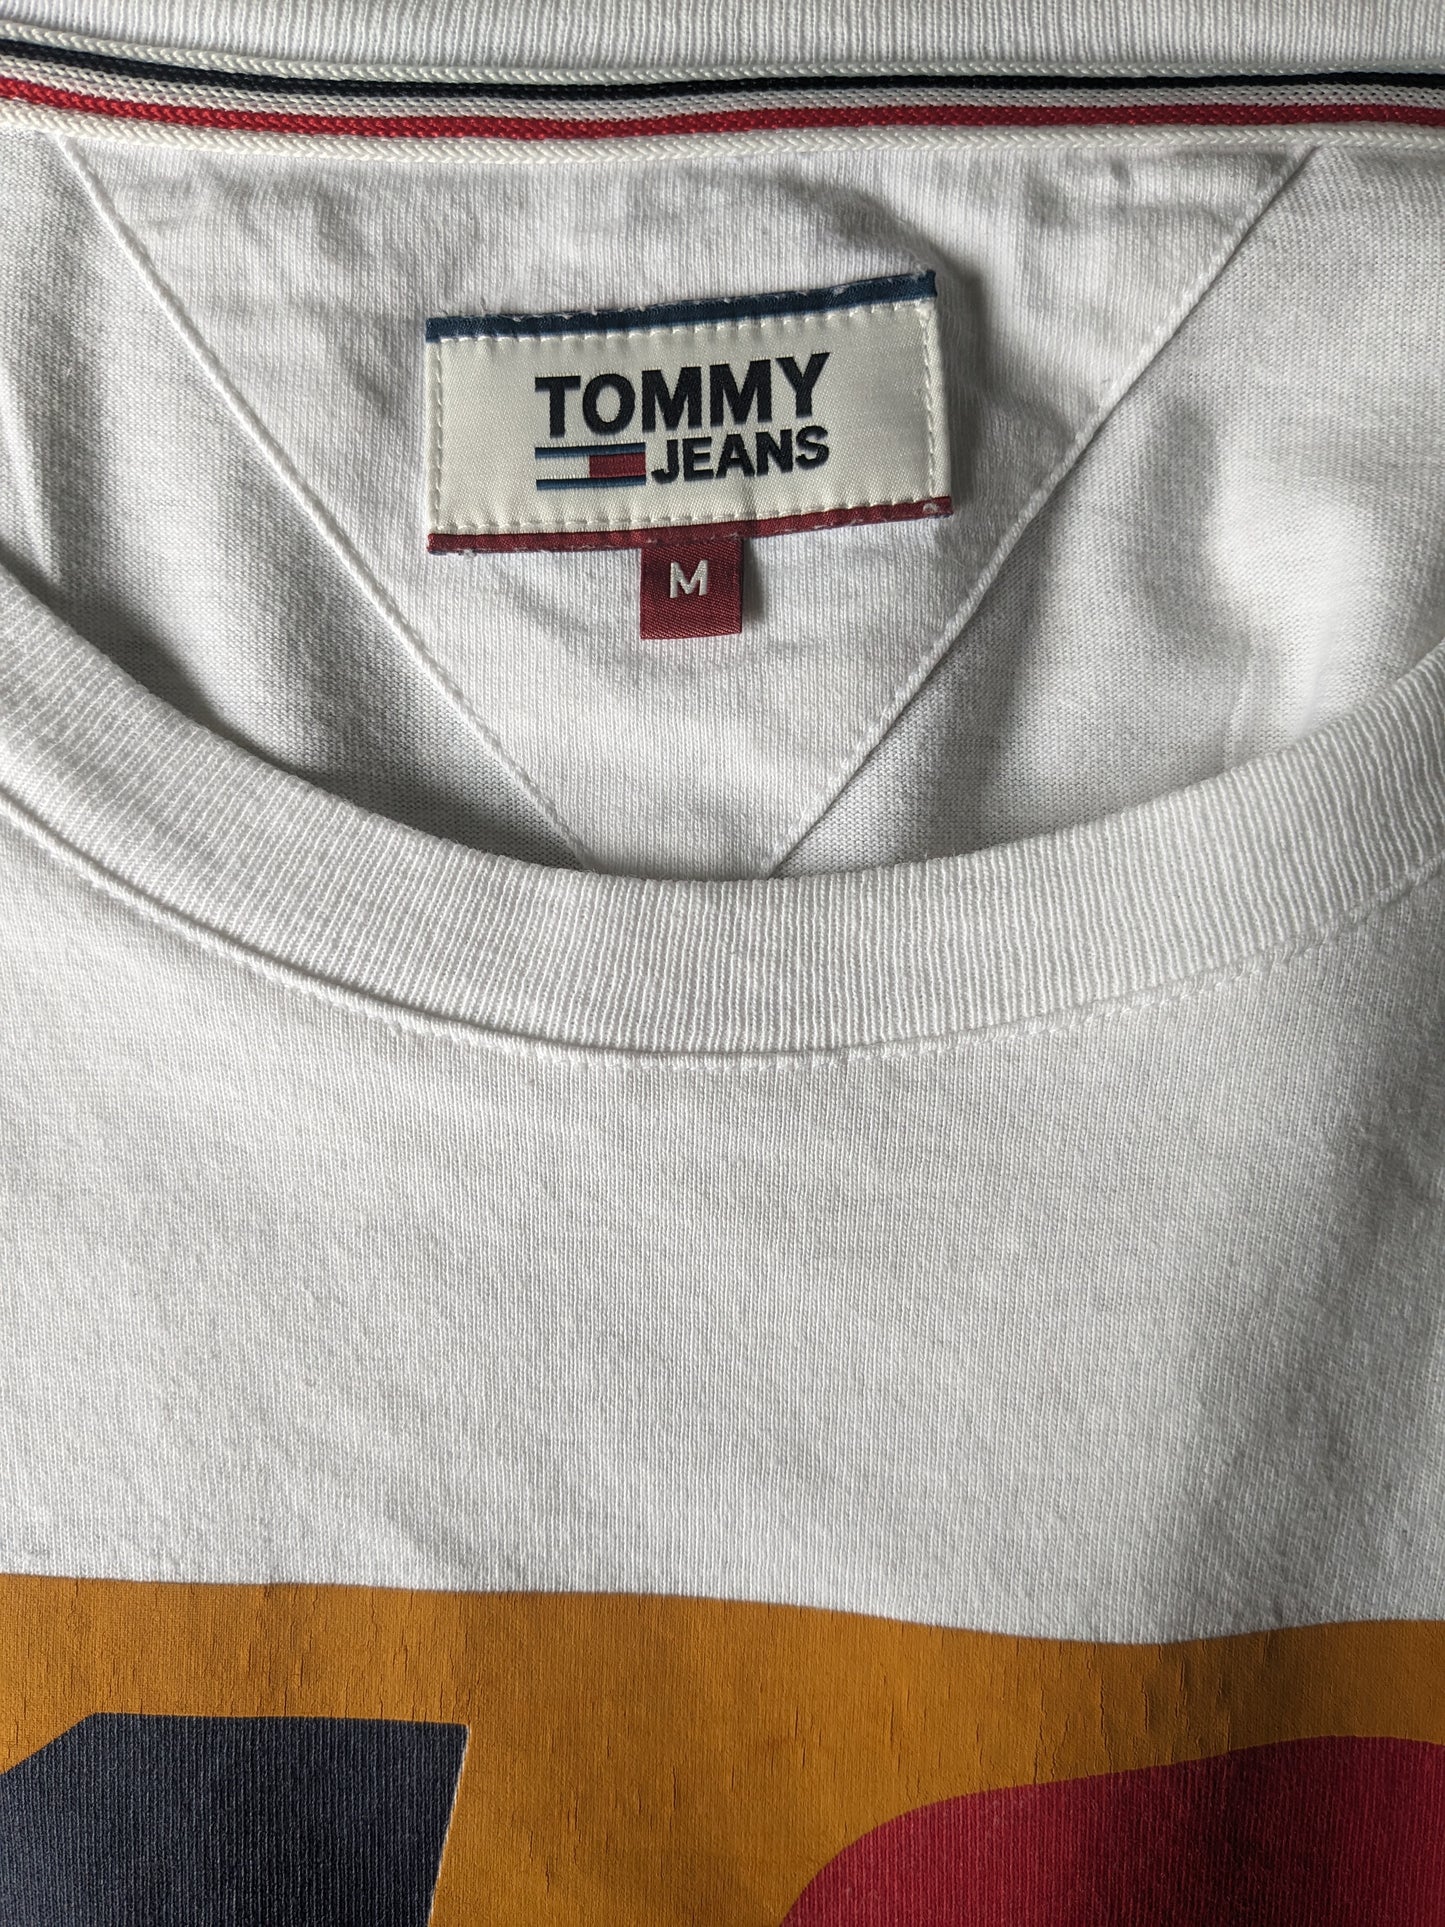 Tommy Jeans Longsleeve. White with print. Size M.